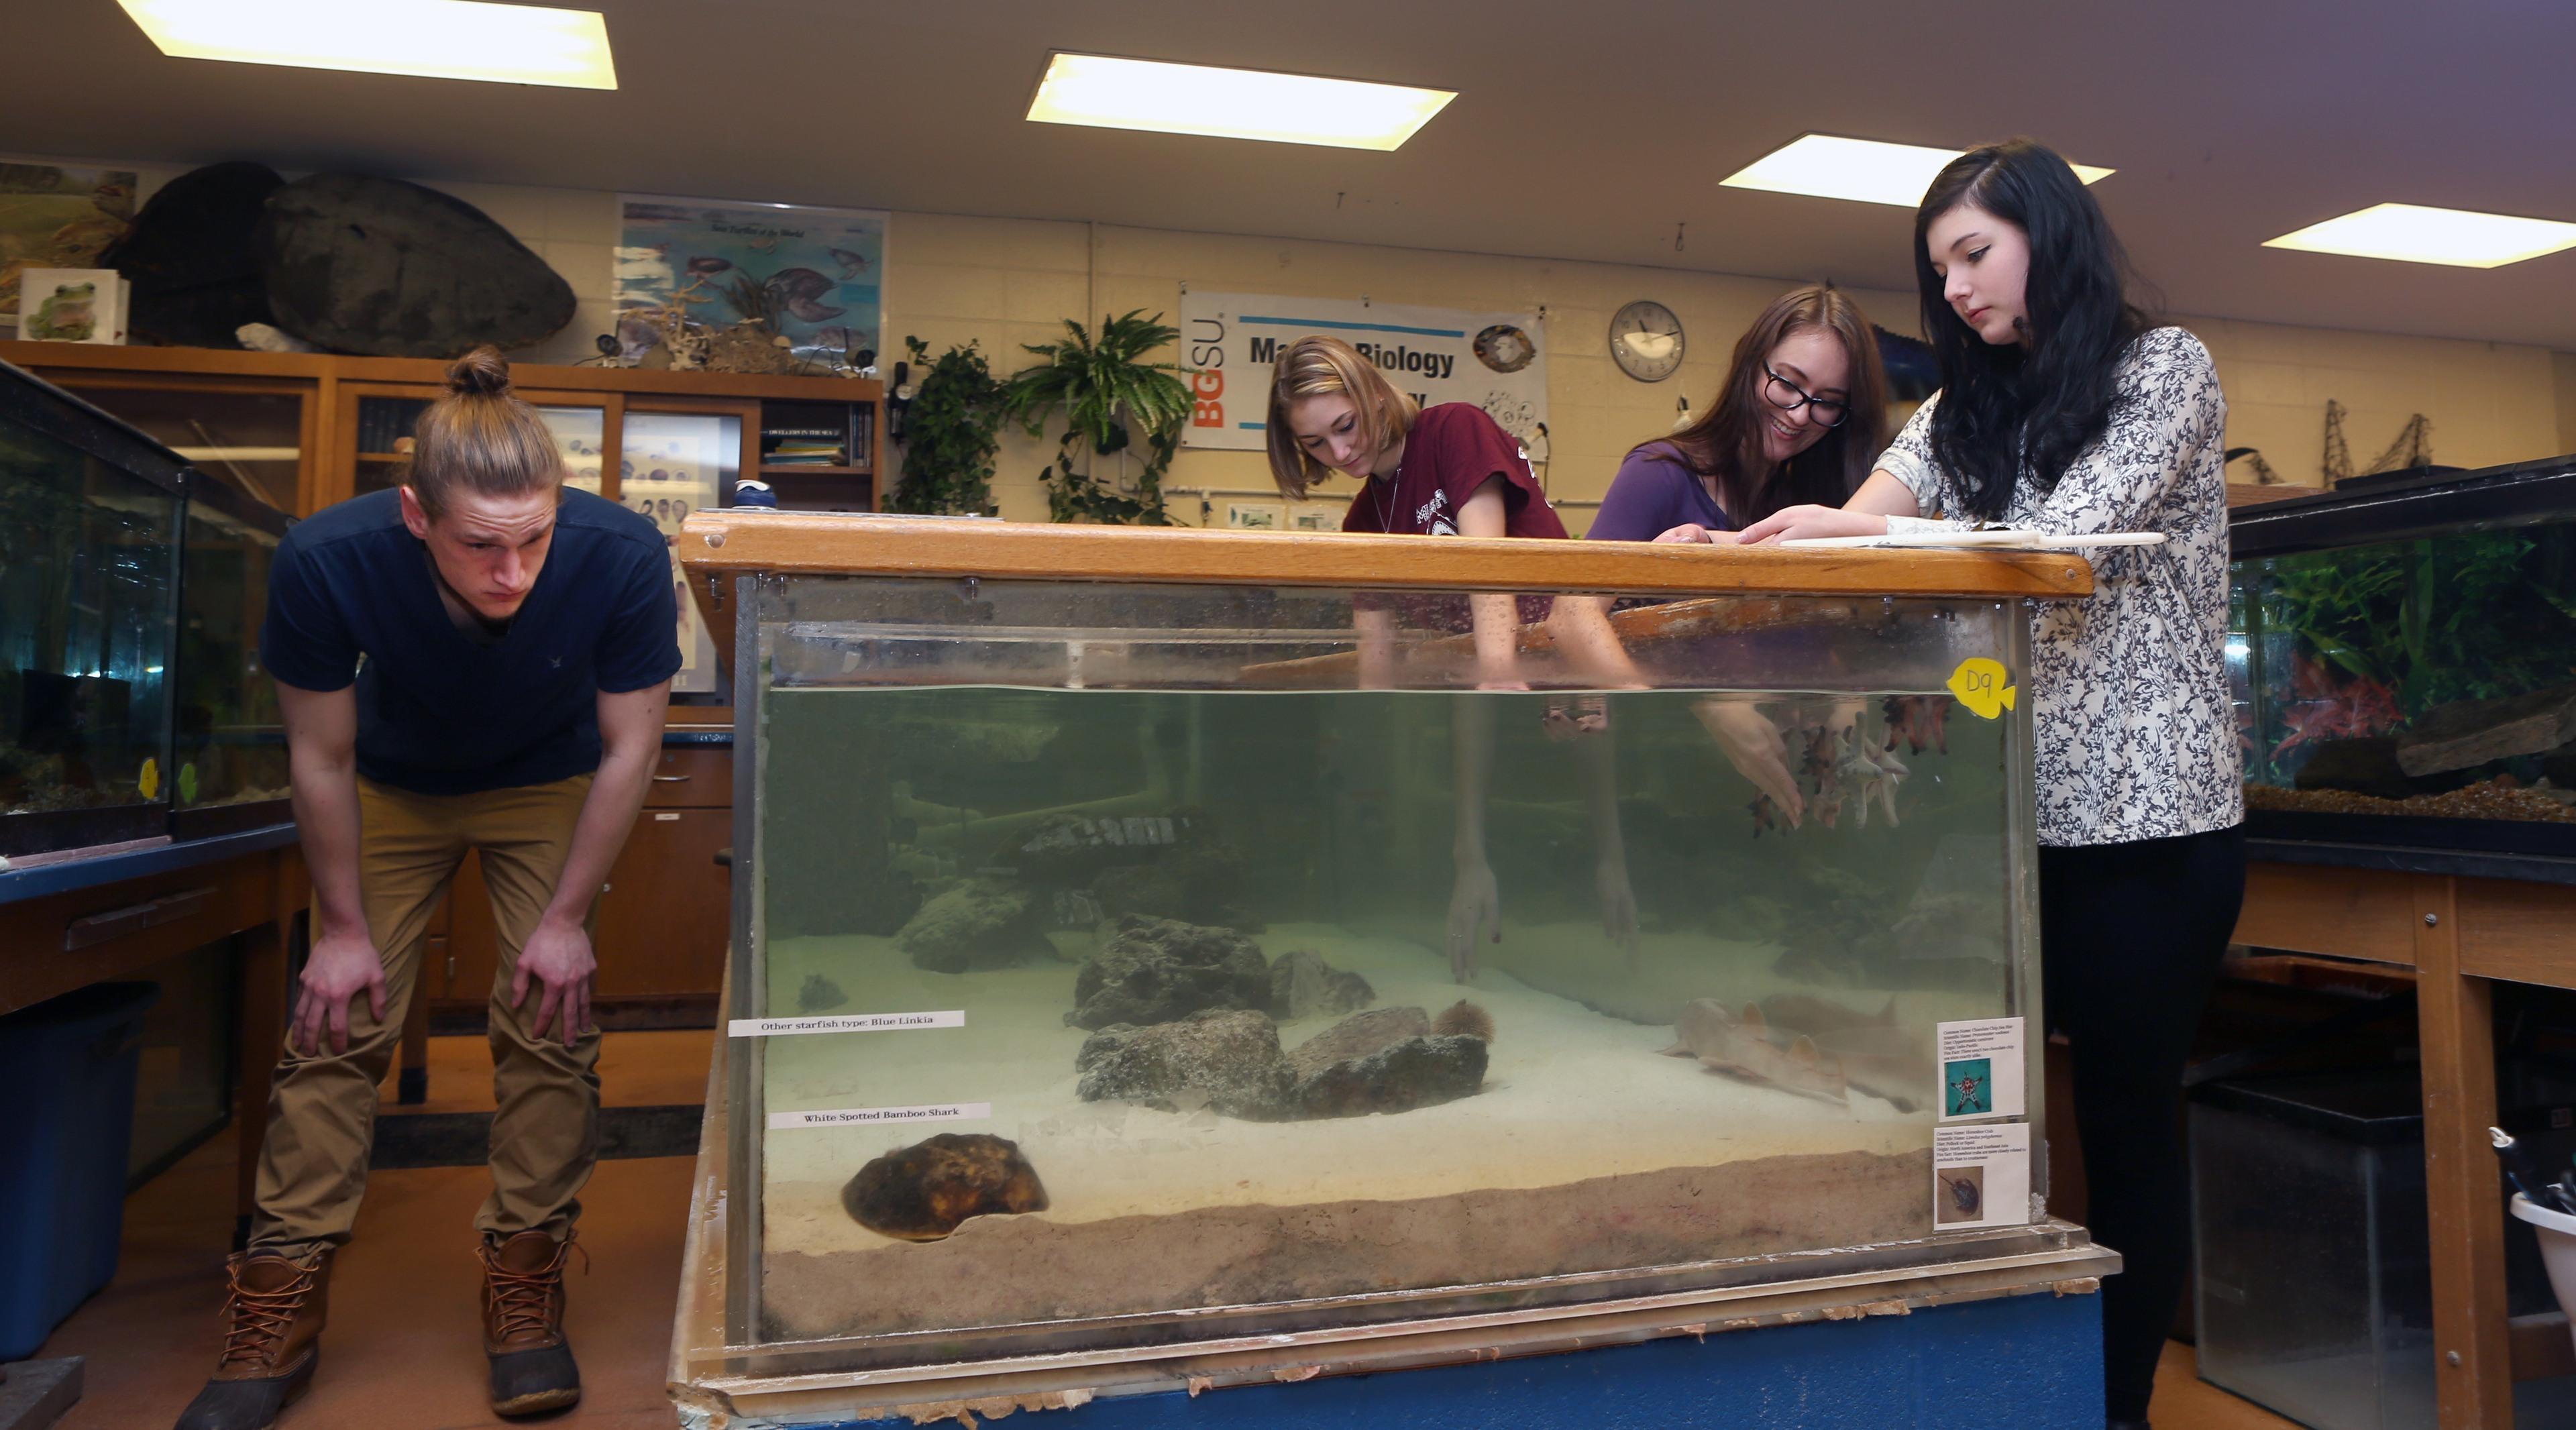 Marine and Biology students observe a tank in a lab